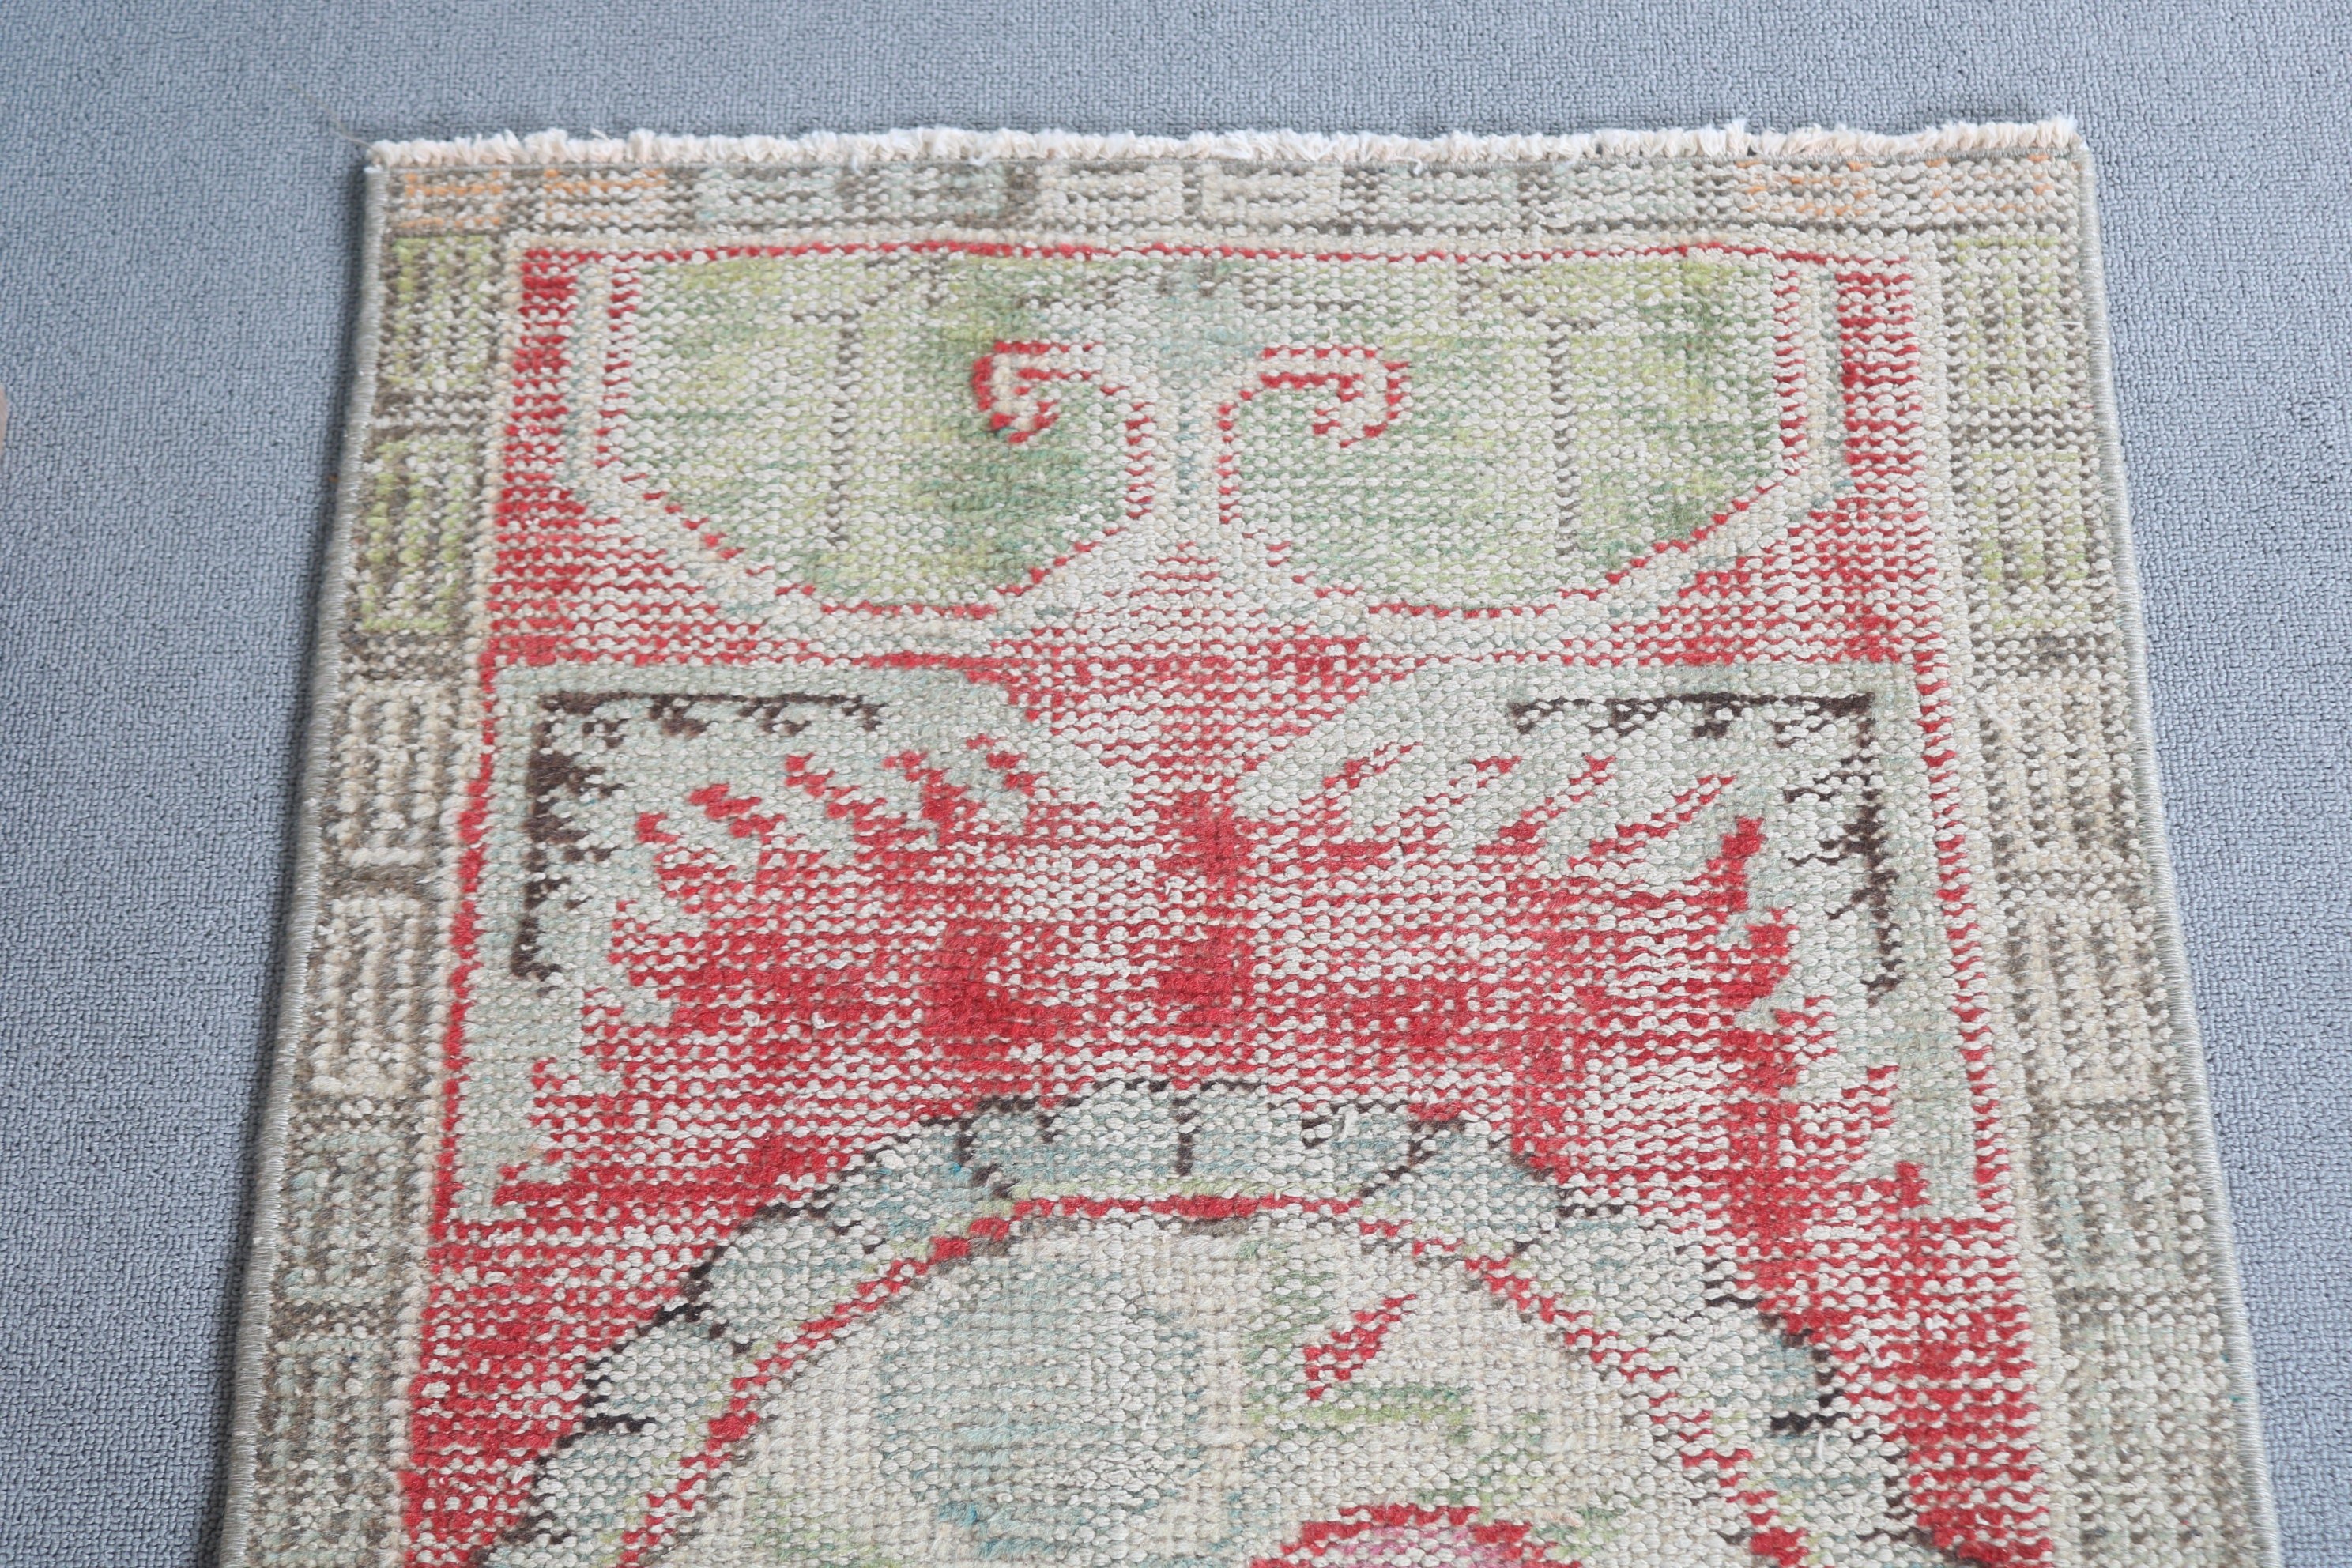 Entry Rugs, Wall Hanging Rug, Kitchen Rugs, 2.1x3.2 ft Small Rug, Green Kitchen Rugs, Vintage Rugs, Turkish Rugs, Floor Rugs, Organic Rug